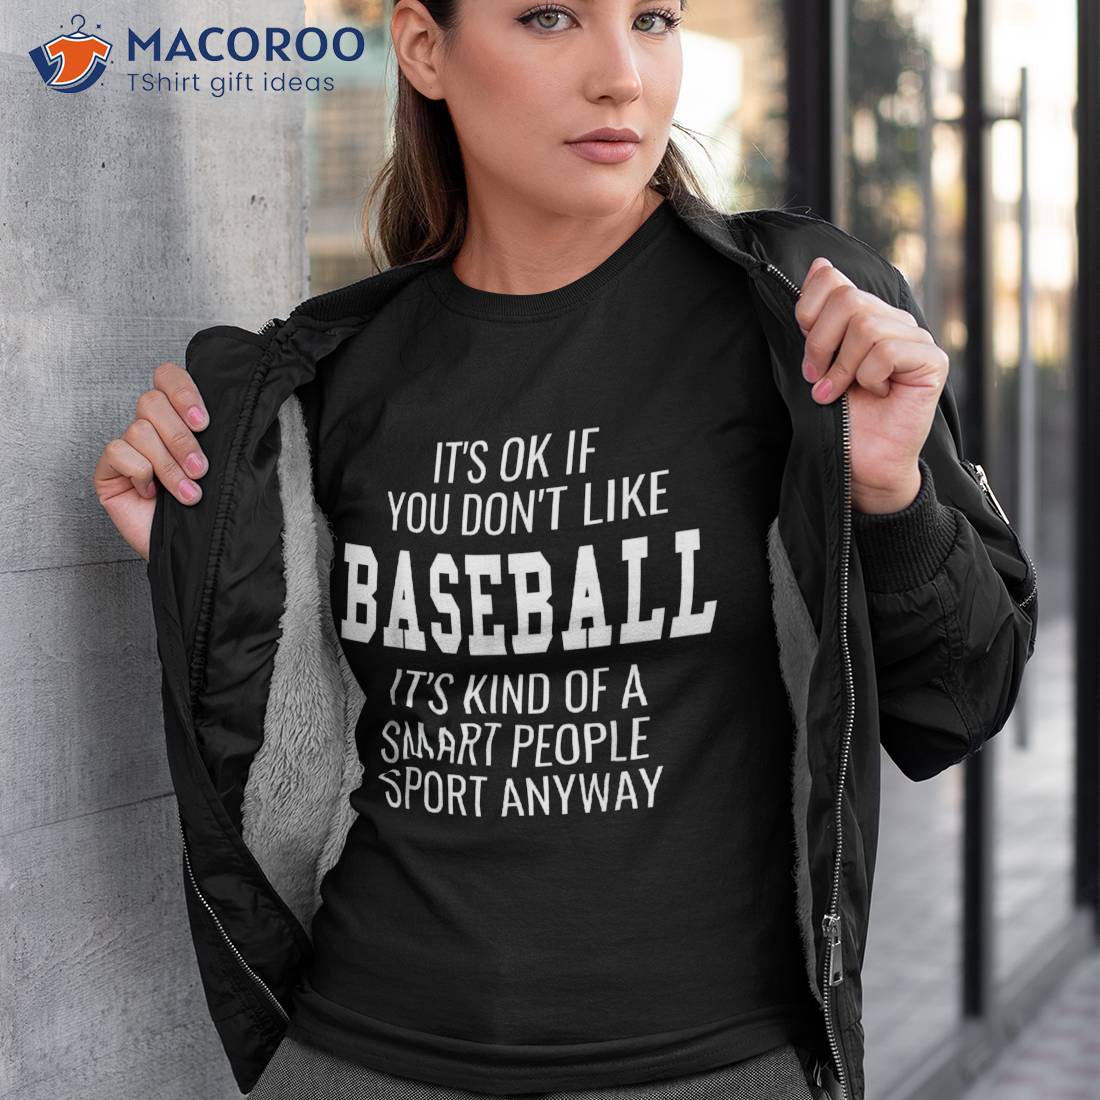 Funny Baseball Shirts Tee Gift With Sayings Its Ok If T-Shirt Dominant  Young Top T-Shirts Normal Tees Cotton Casual - AliExpress